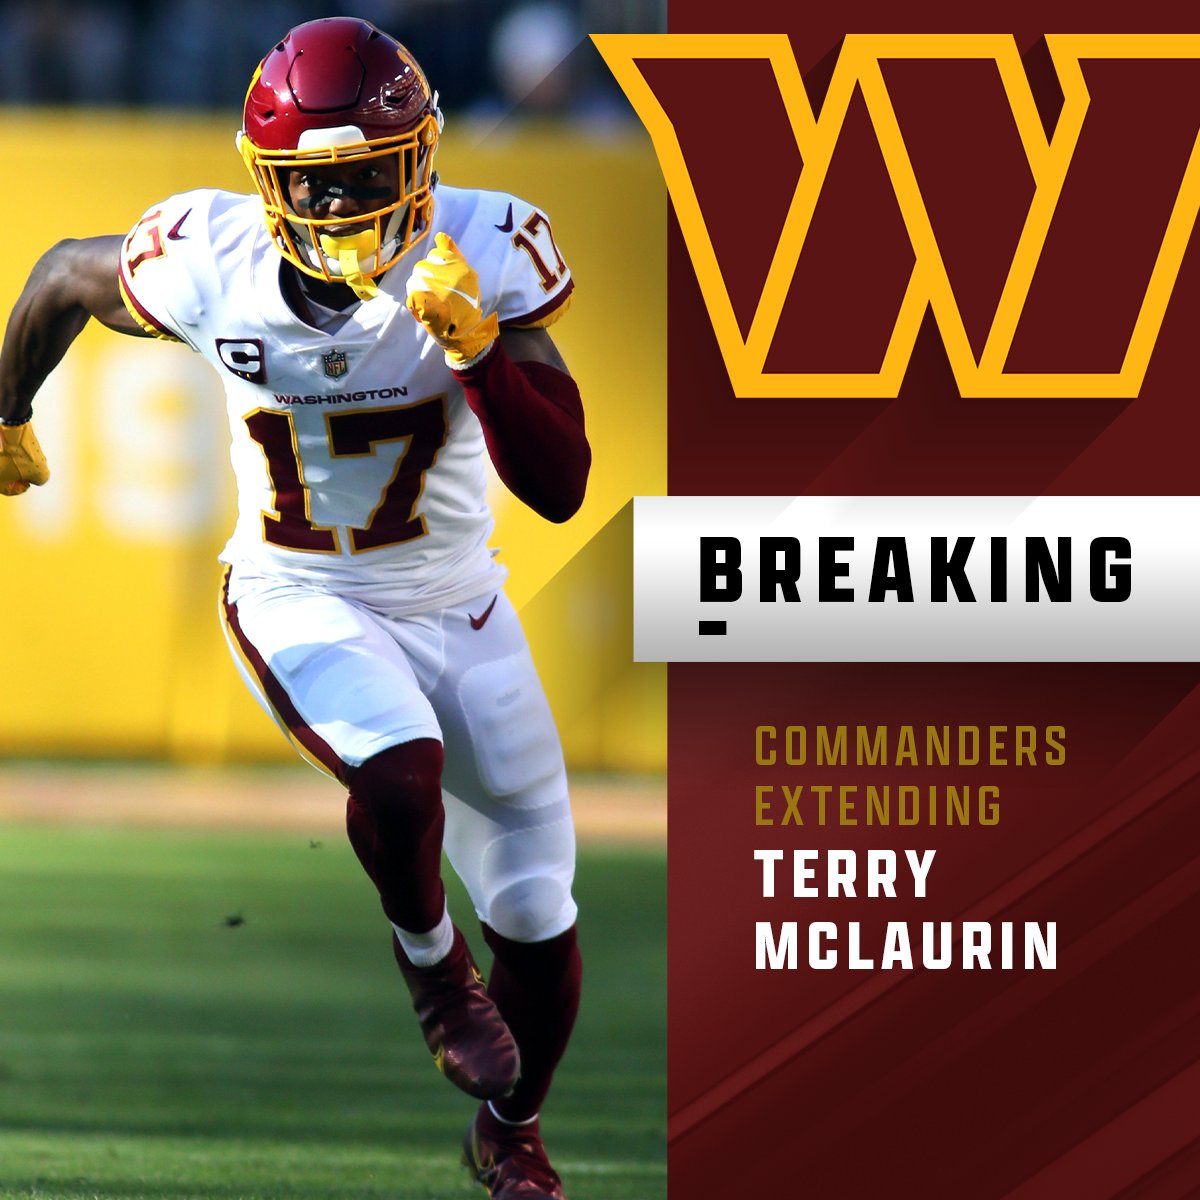 Commanders agree to 3-year extension with WR Terry McLaurin worth up to $70M. (via @RapSheet)